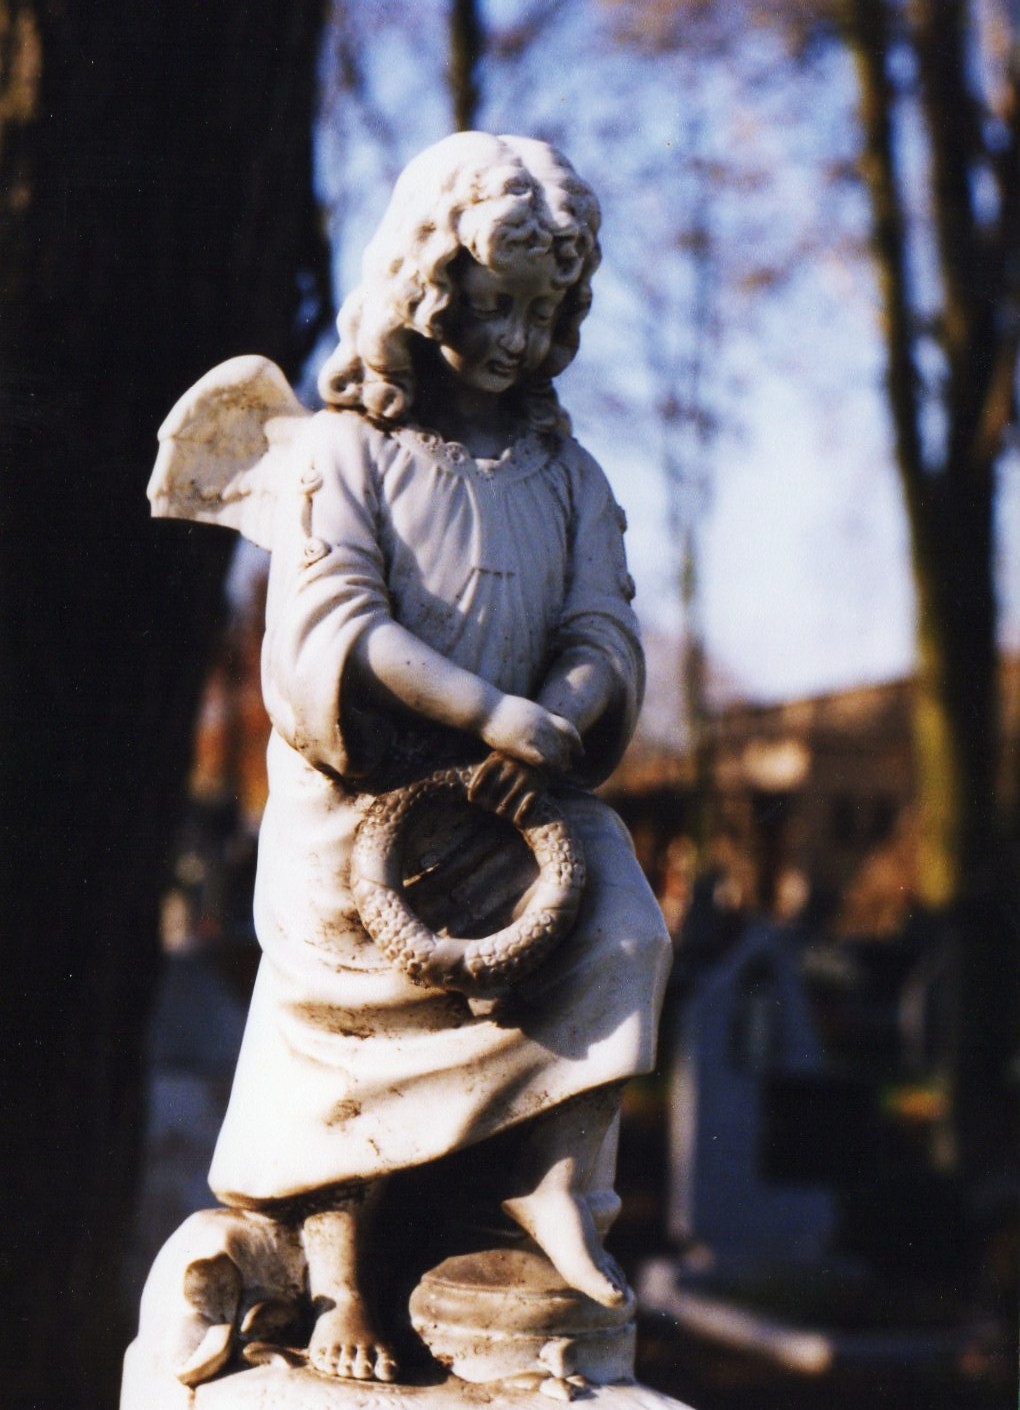 Wikipedia, 1993 in Poland, Cemetery in Witkowo, Self-published work, Statues of angels